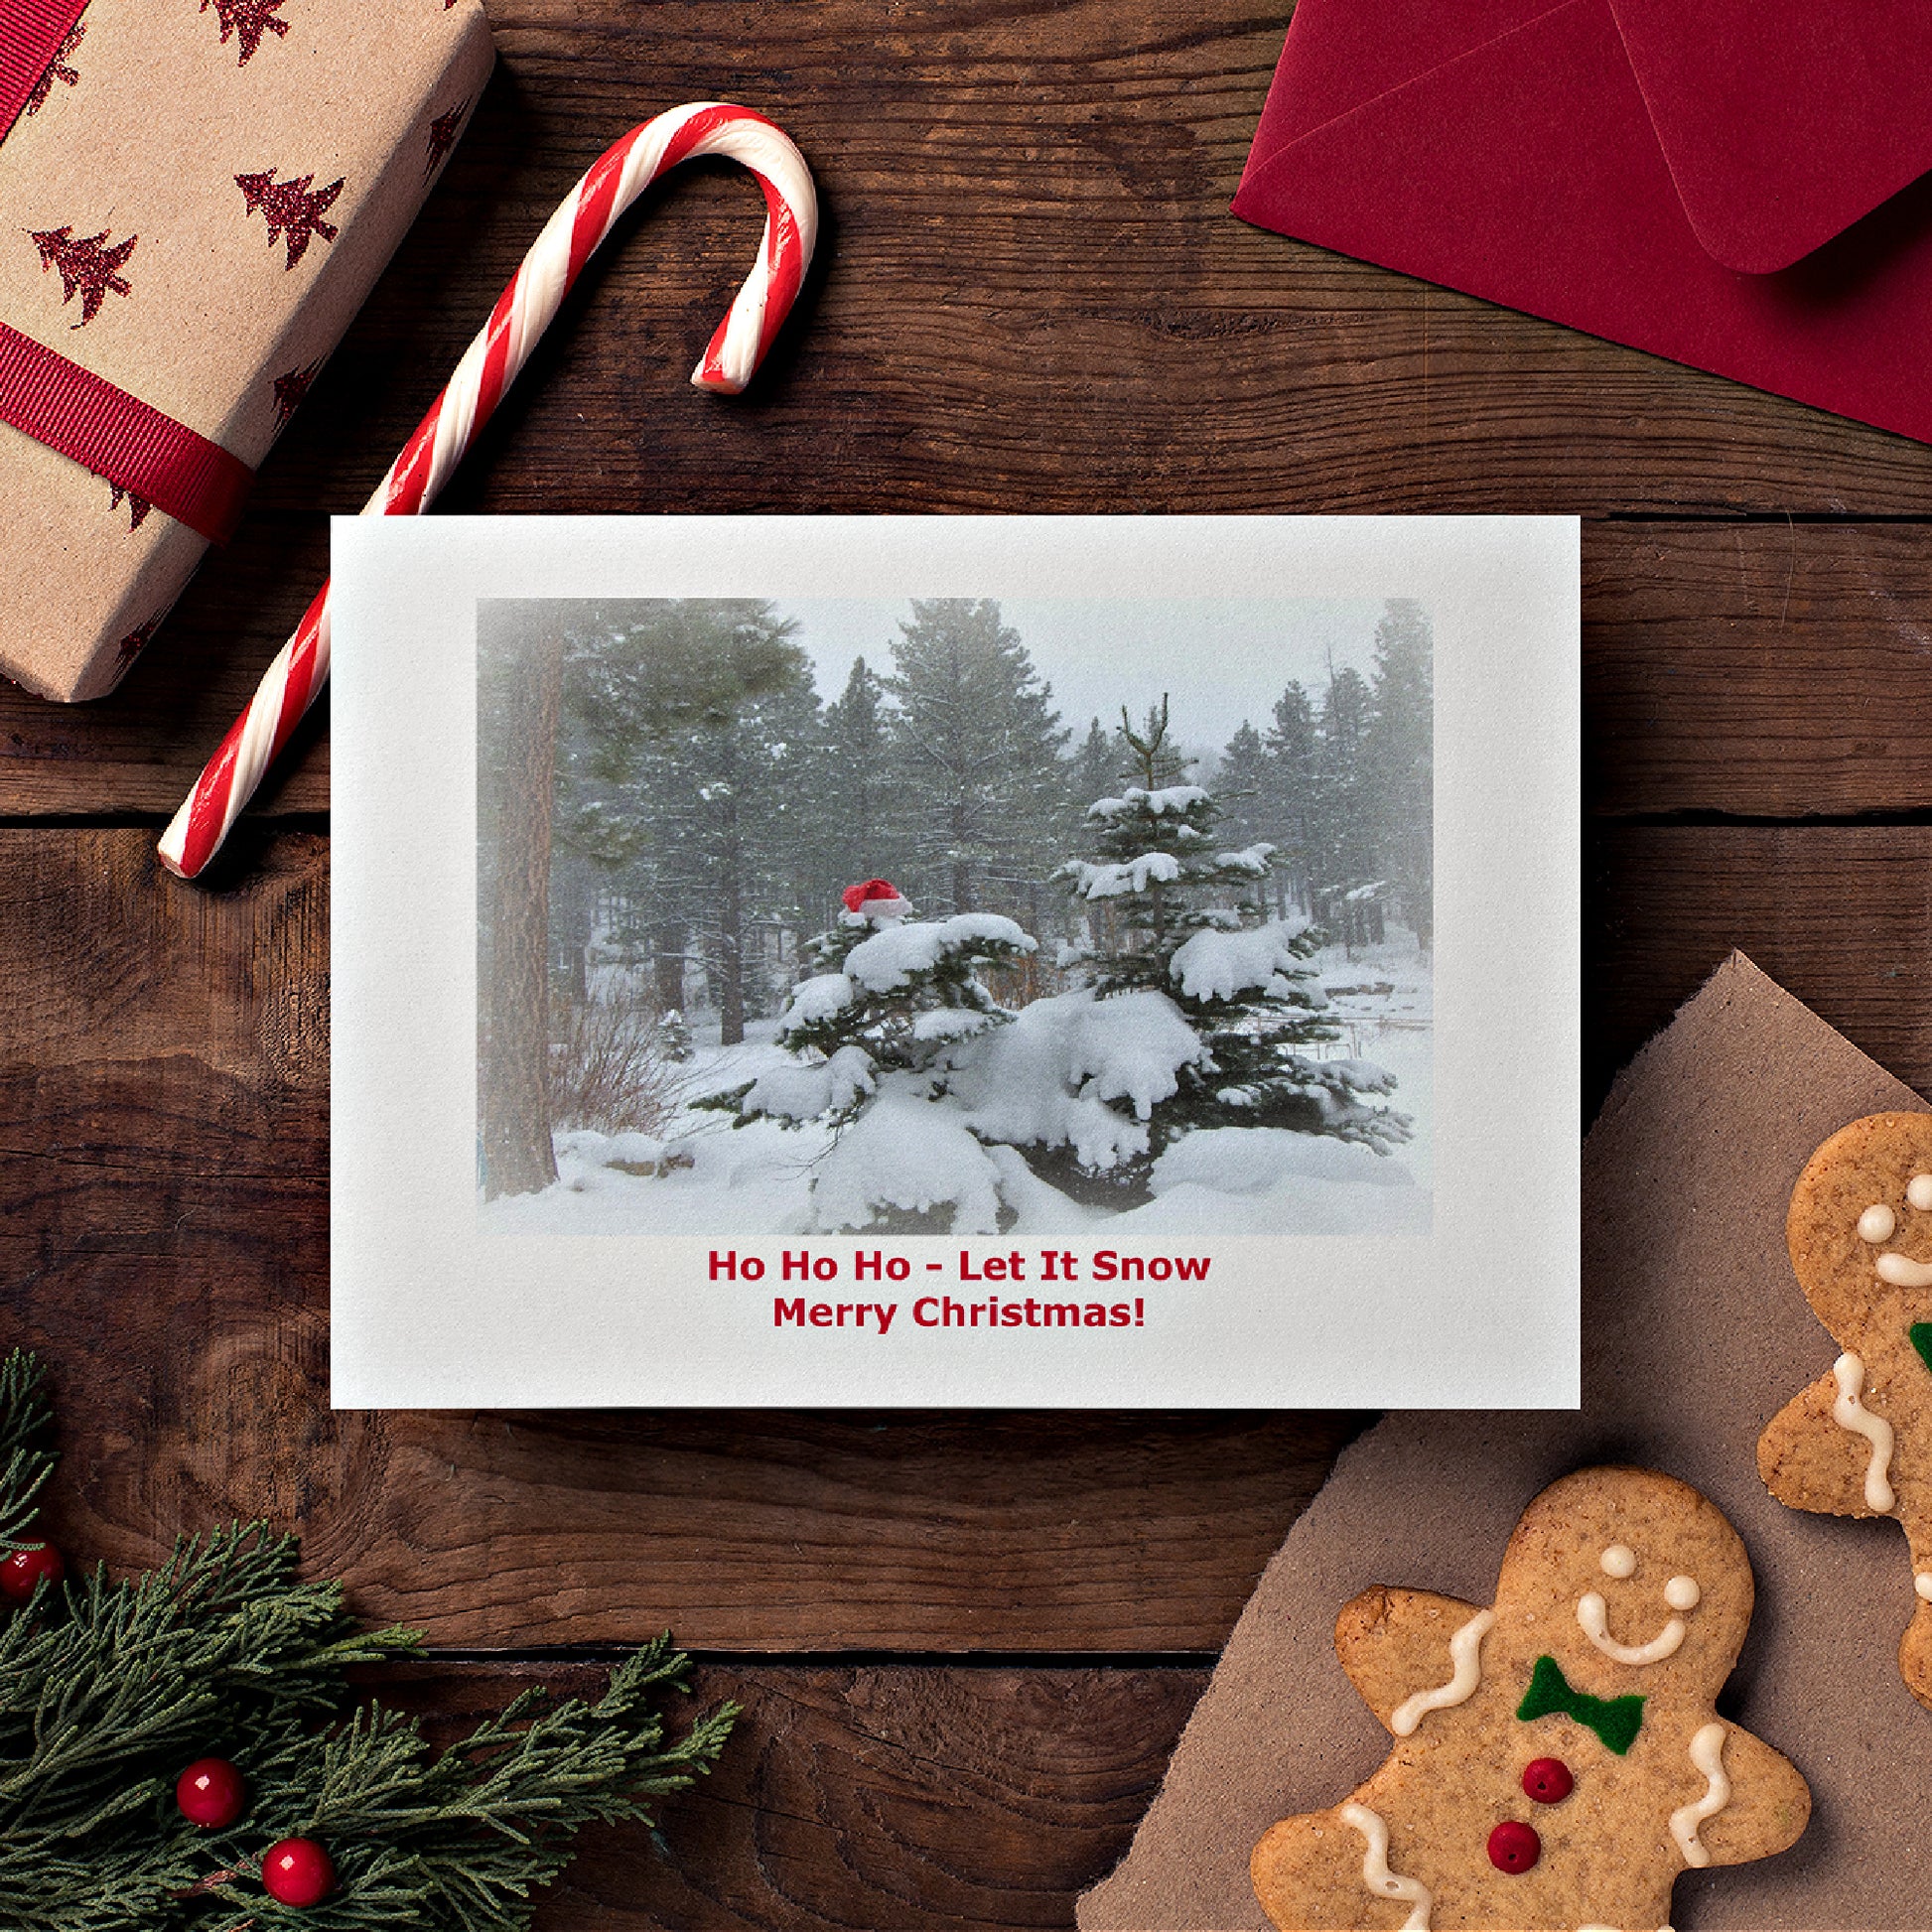 Mockup of our Single Christmas Card featuring Santa's Hat on a snow-laden tree with Red Printed text below